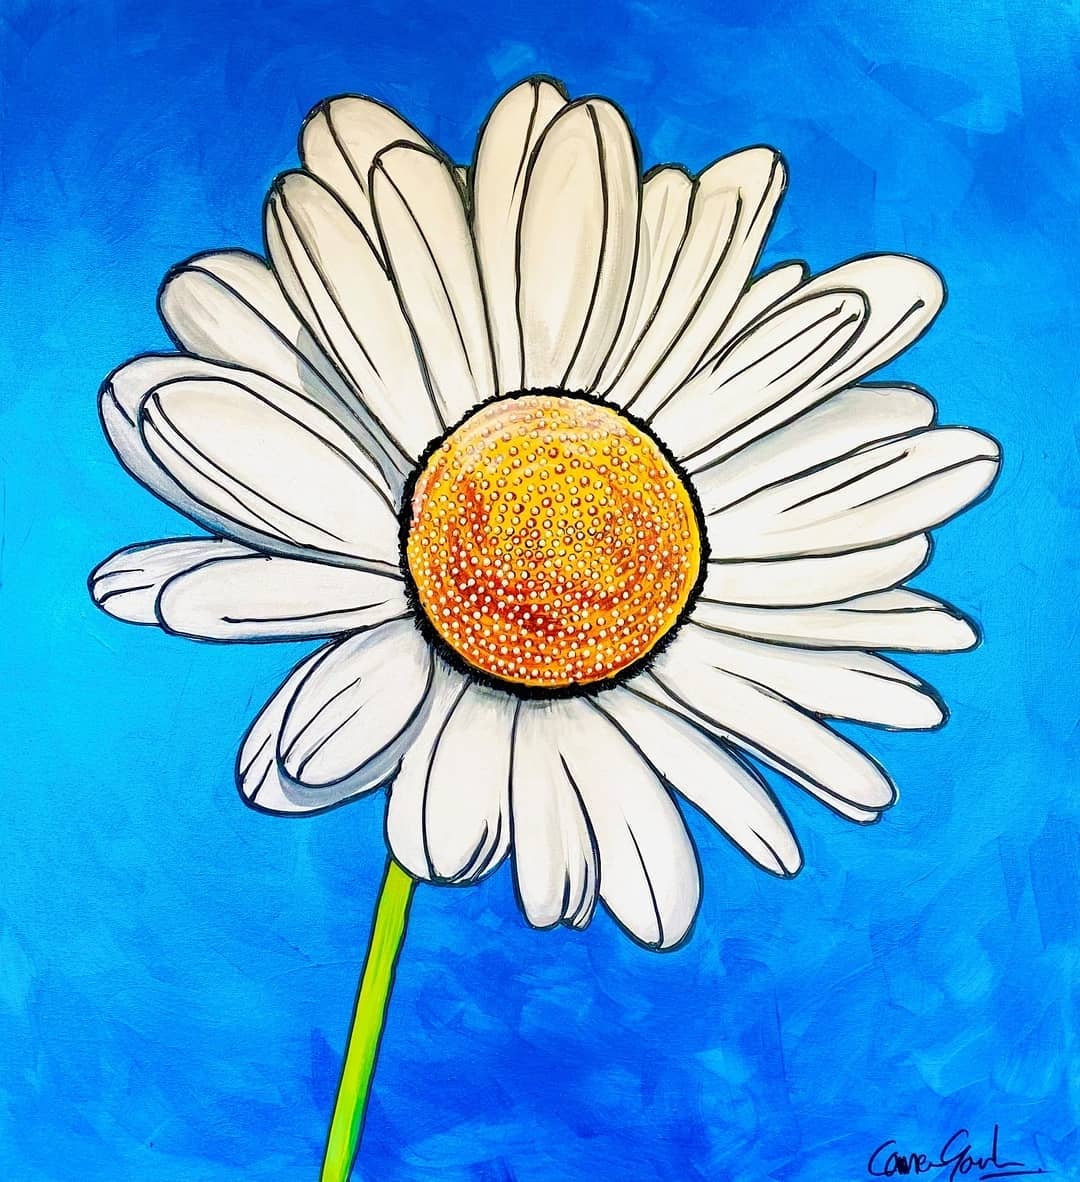 The flowers are beginning to bloom! 
​Our thematic exhibition 'The Flower Market' features new works by a variety of tjg artists including CAMERON GORDON. 
​
​'Daisy'
​91 x 91cm acrylic and silicon on canvas 
​ $ 1,250.00
​
​